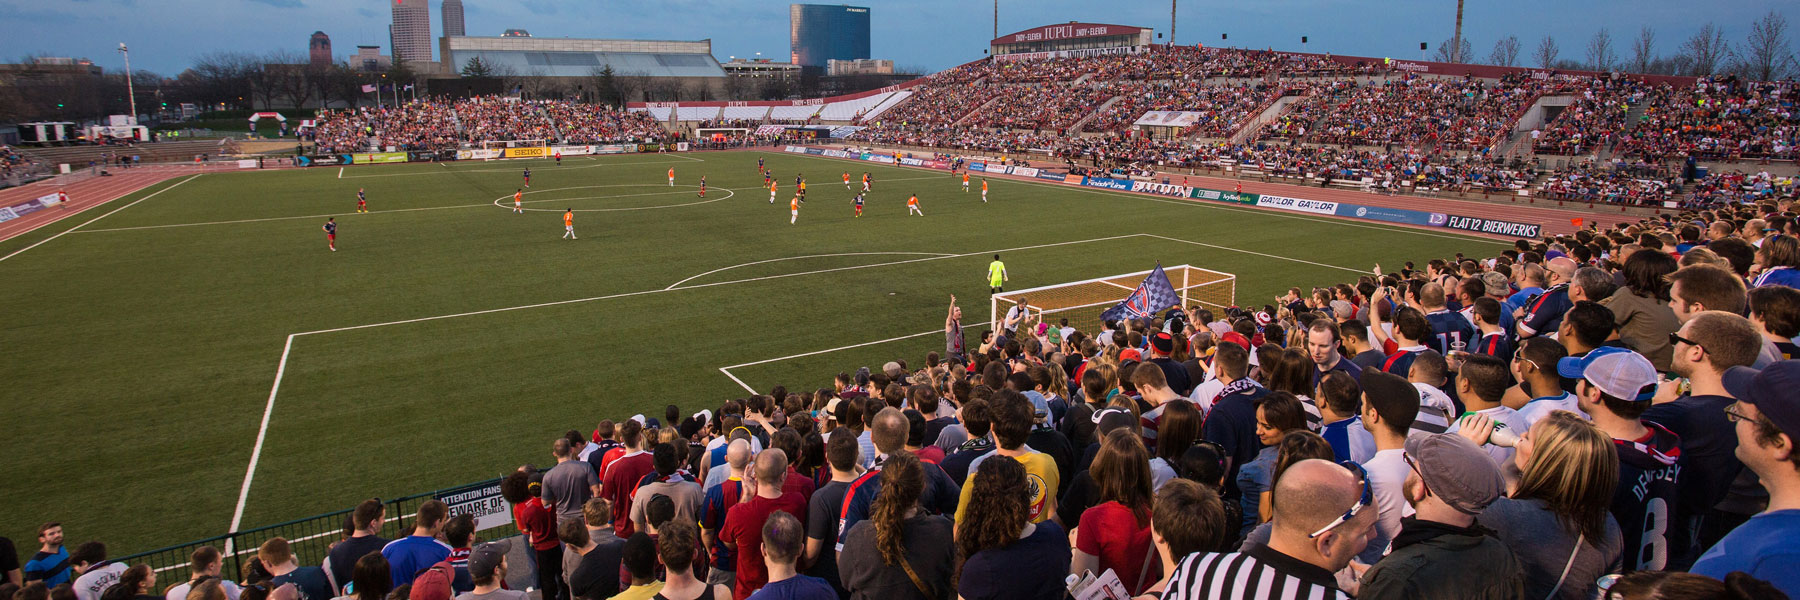 Stands view of an Indy Eleven game 